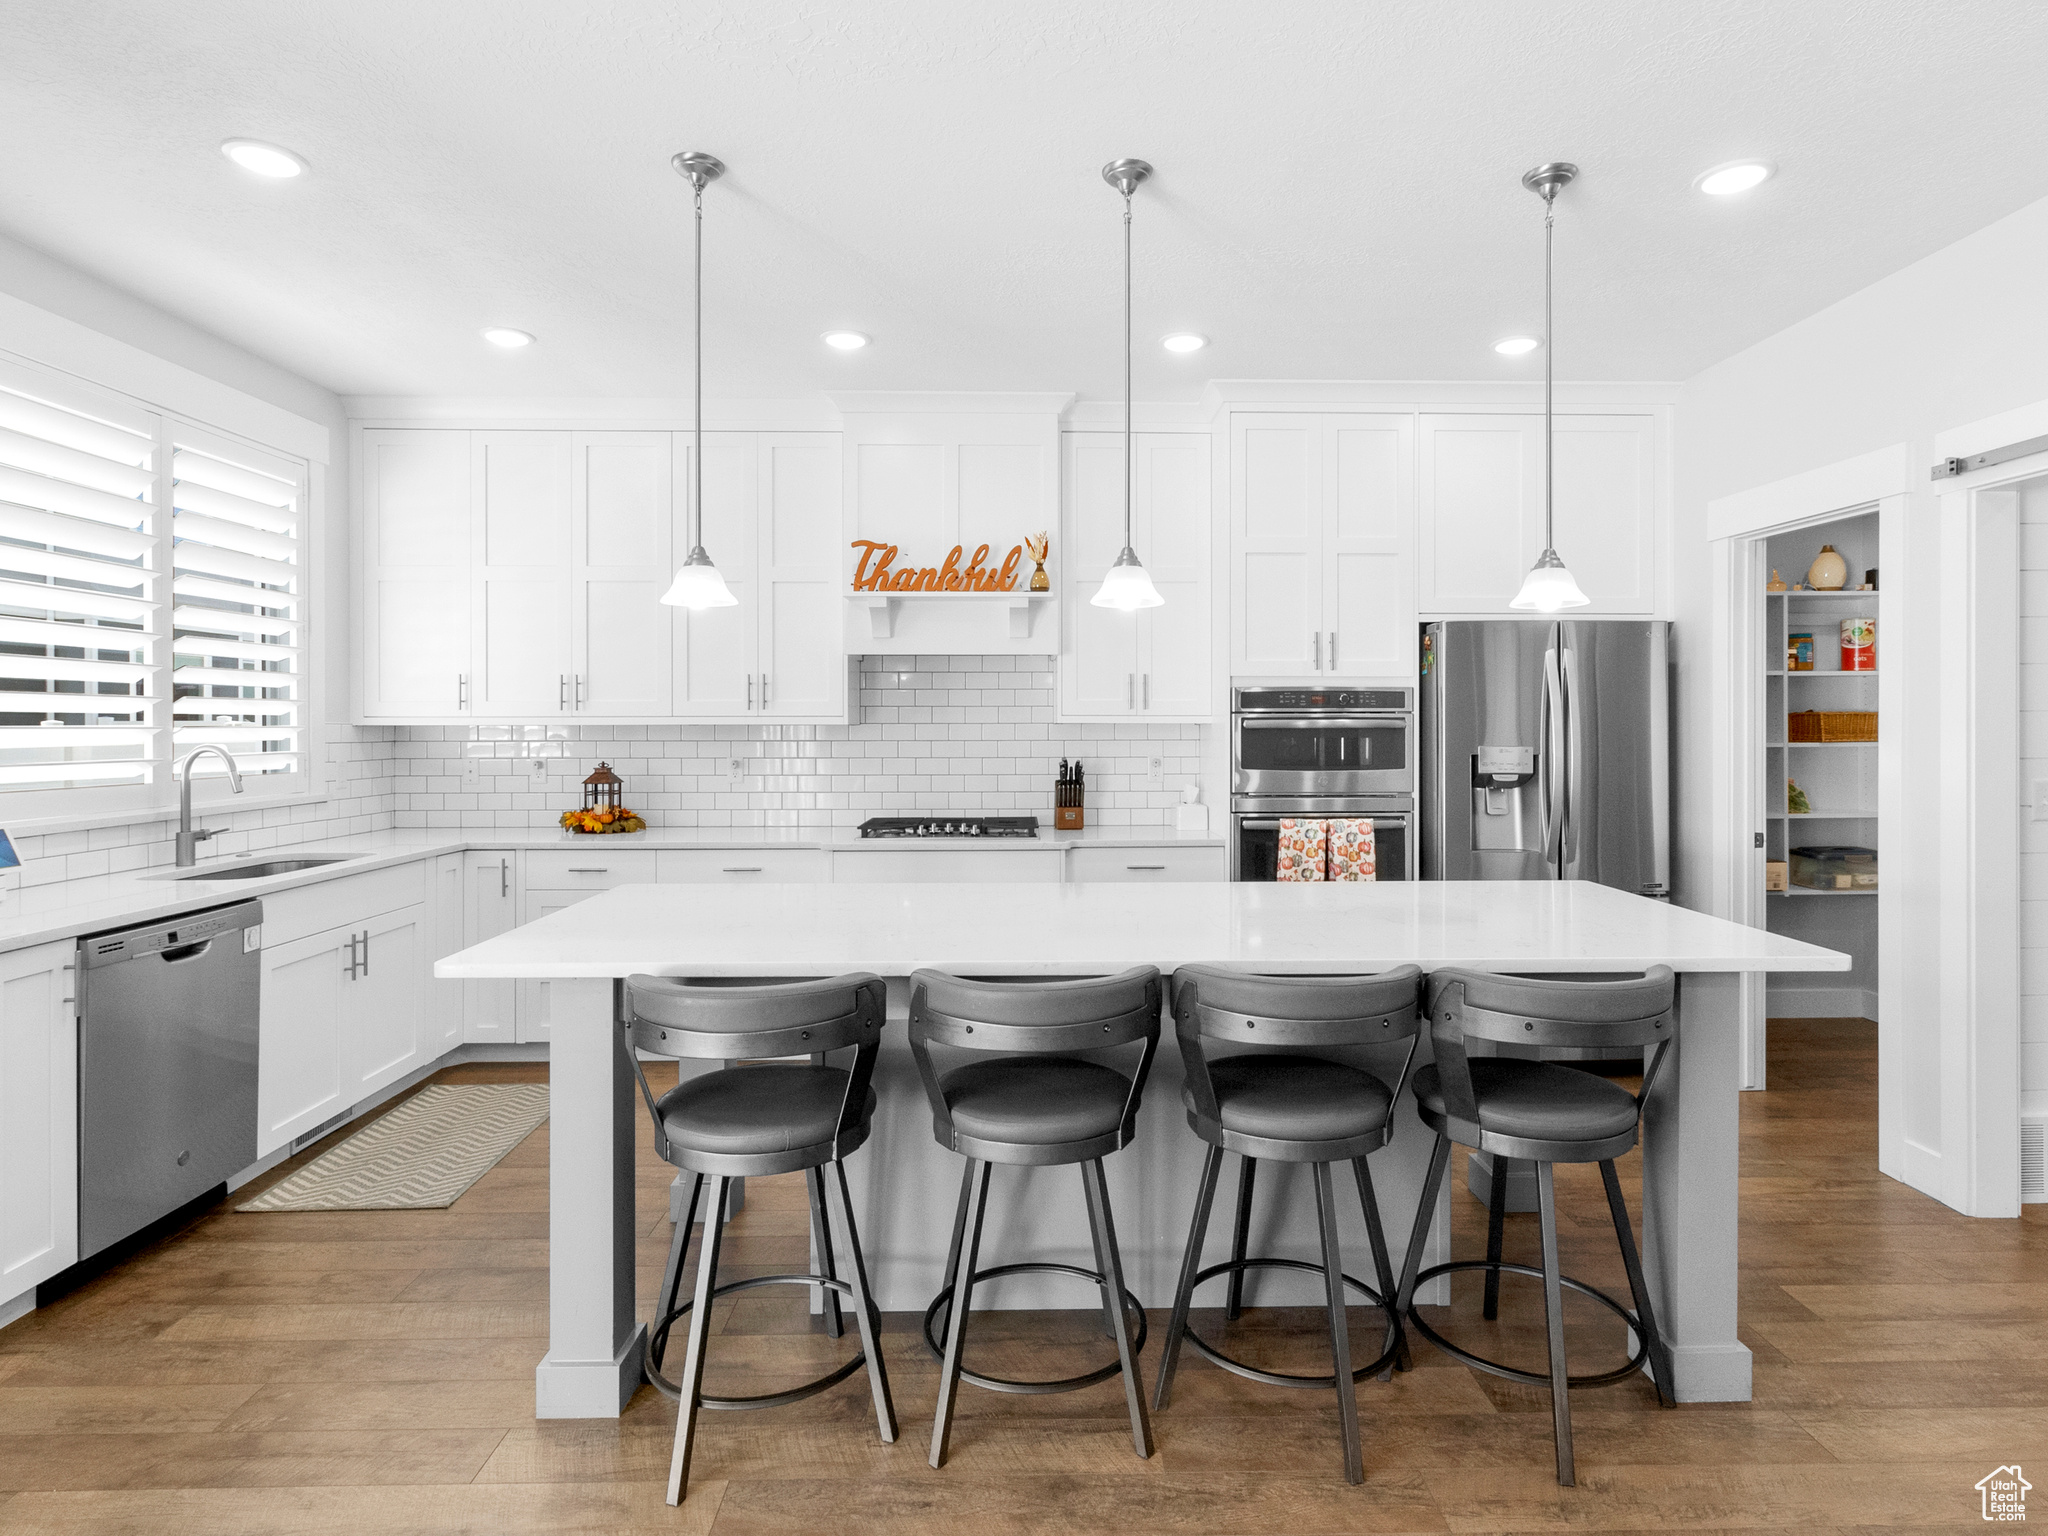 Kitchen with a kitchen bar, appliances with stainless steel finishes, light hardwood / wood-style flooring, tasteful backsplash, and a center island